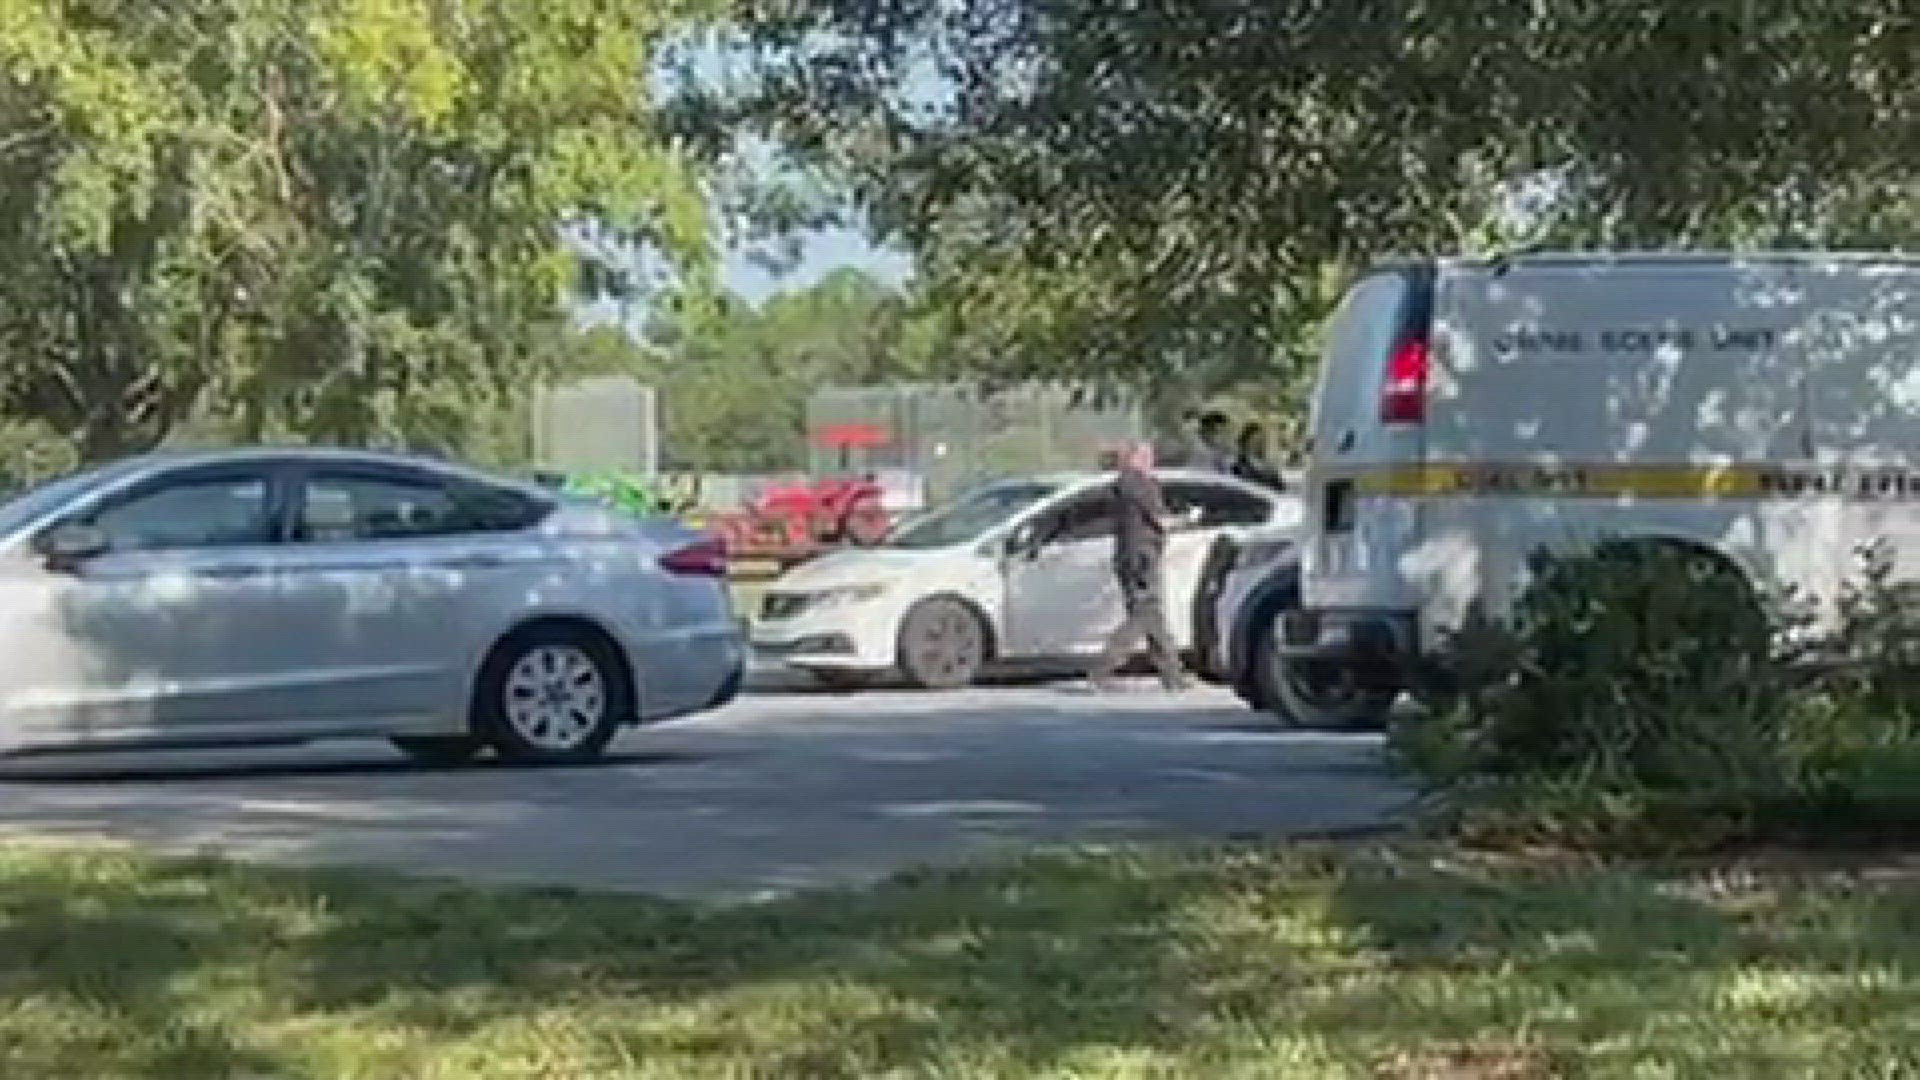 The Jacksonville Sheriff's Office says a woman was found dead with gunshot wounds inside of a vehicle at Our Community Club Park Thursday morning.
Credit: Joe Massa